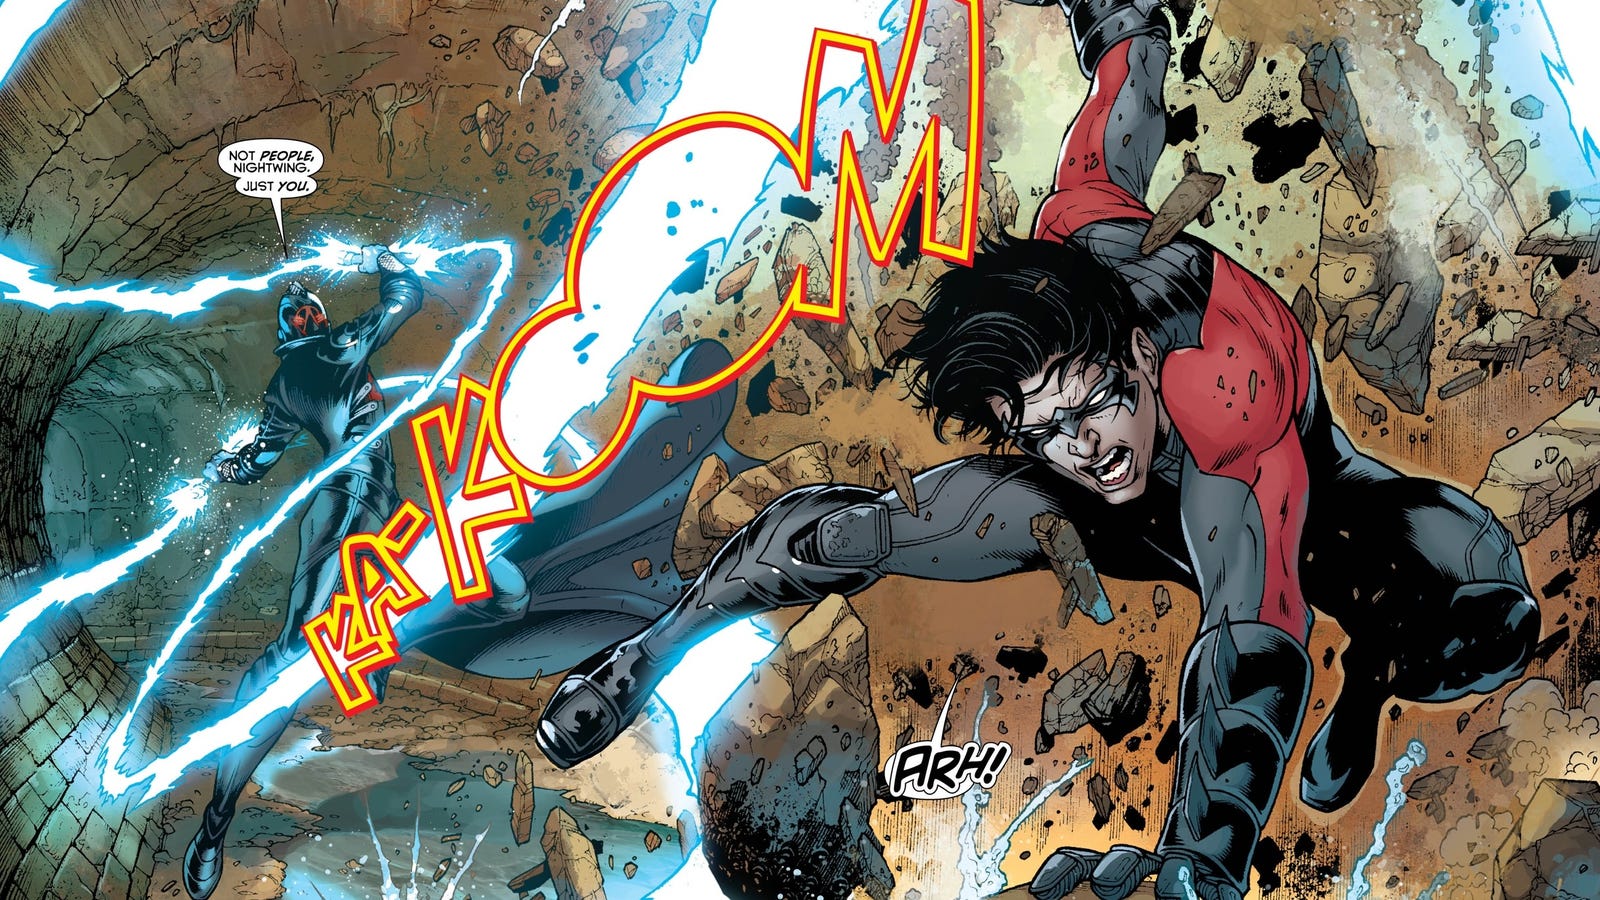 Dick Grayson Goes Underground In This Preview Of Nightwing 12